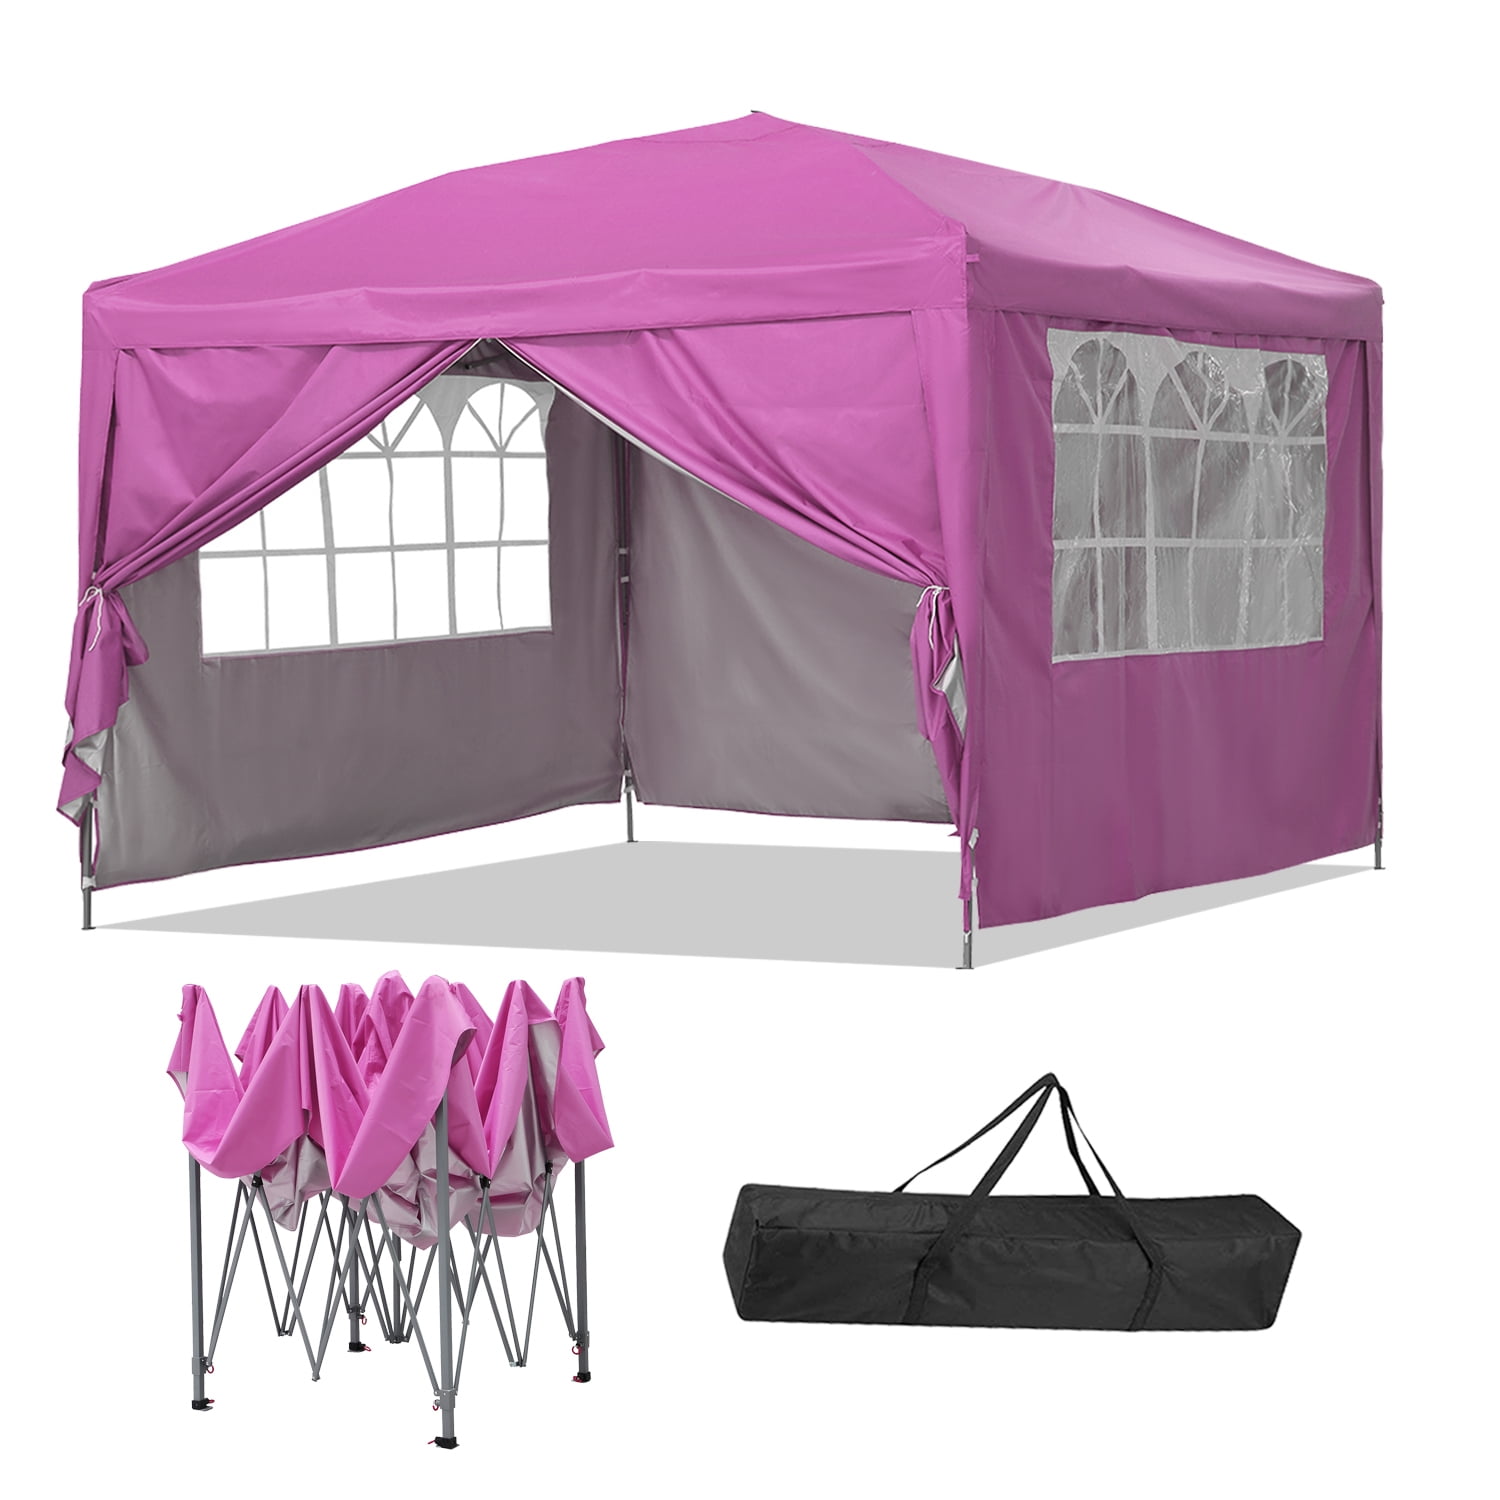 Outdoor Basics 10 ft x 10 ft Pop Up Canopy Tent with Carry Bag, Great for Picnic, Yard, Beach, Park, Camping, Blue